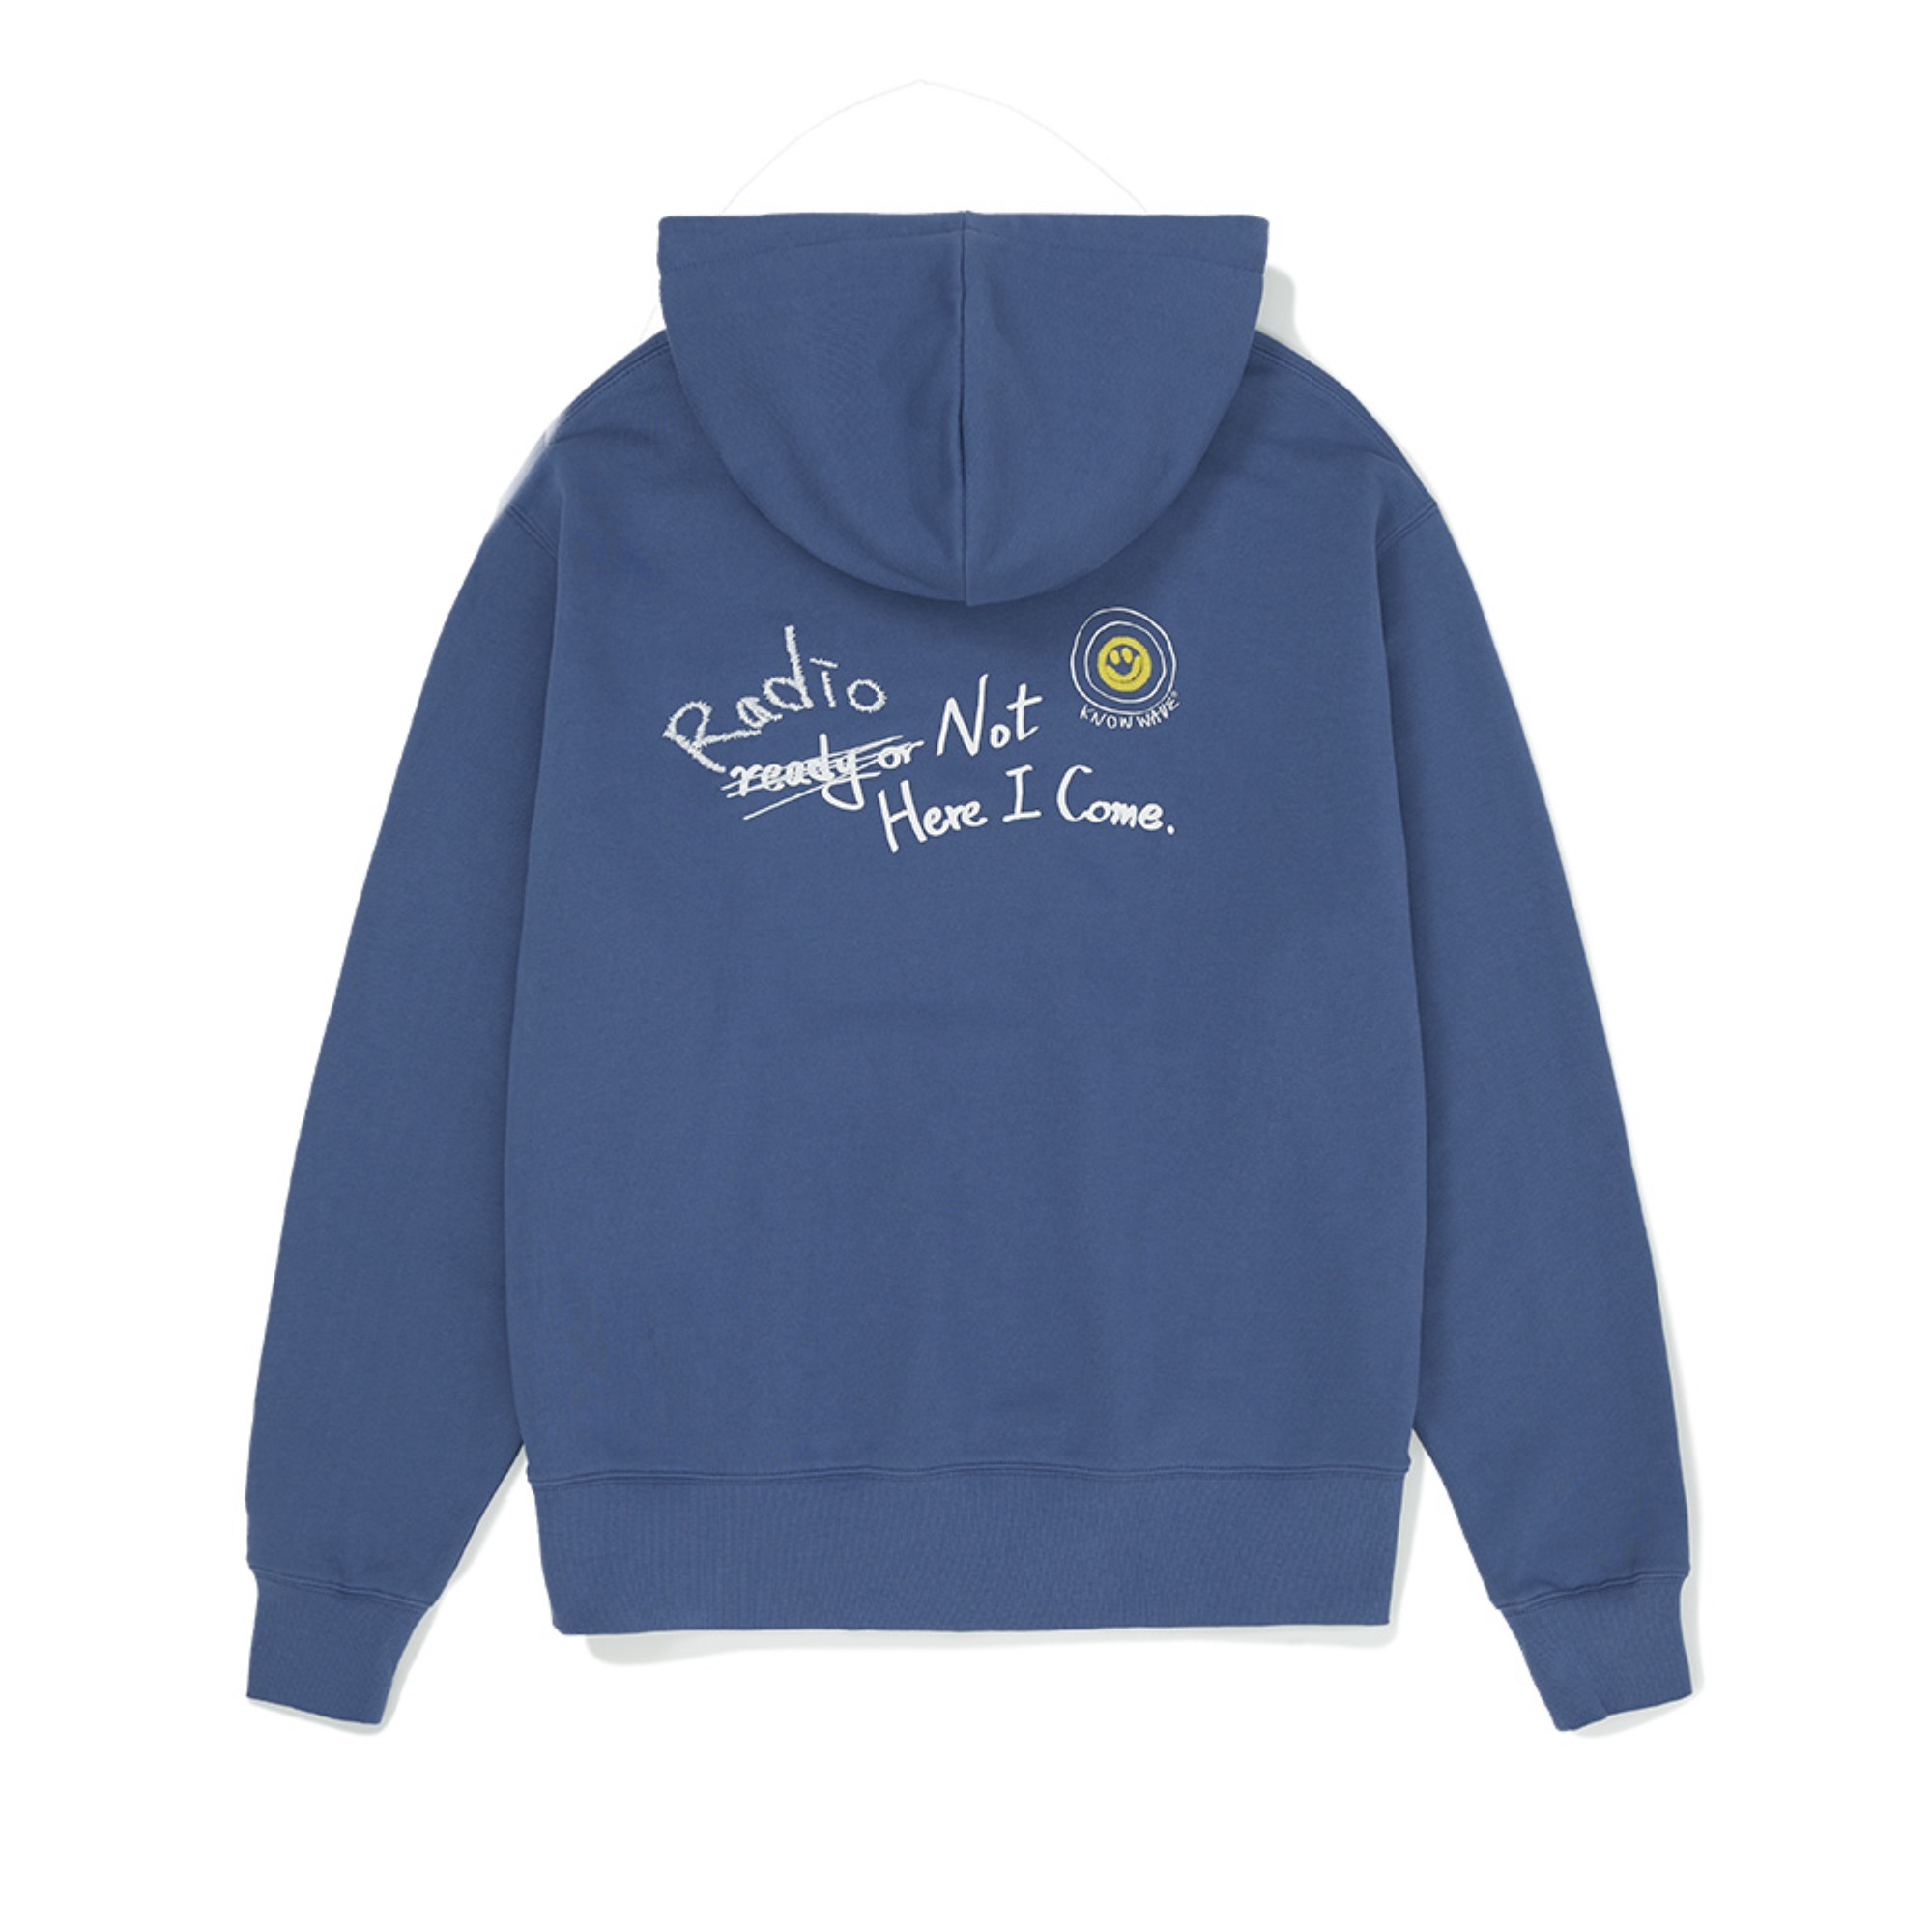 READY OR NOT SMILE EMBRODIERY HOODIE KNT028m(BLUE)